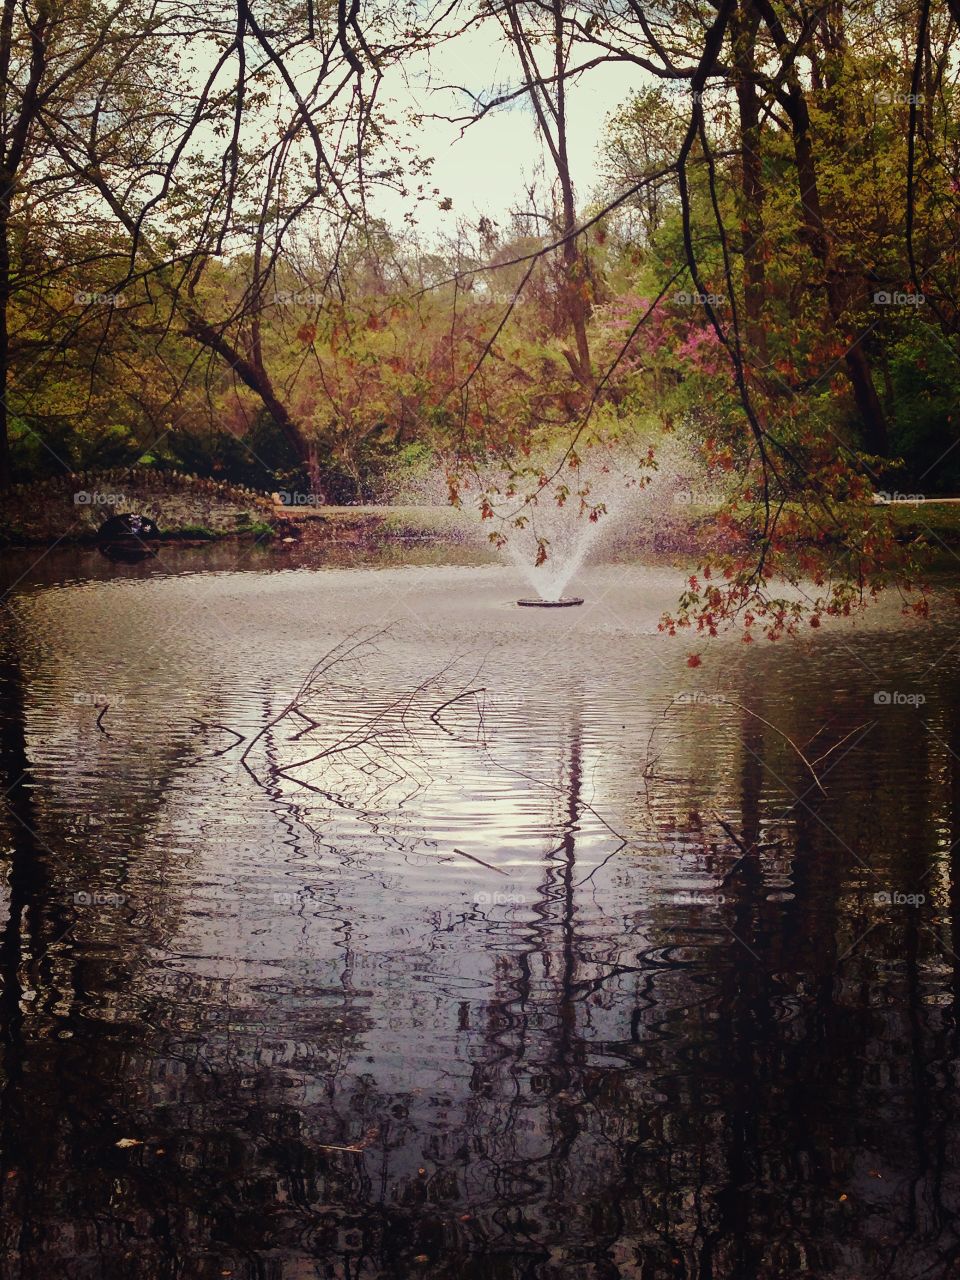 Misty Springs . I was at a park and saw this lake and had to take picture!